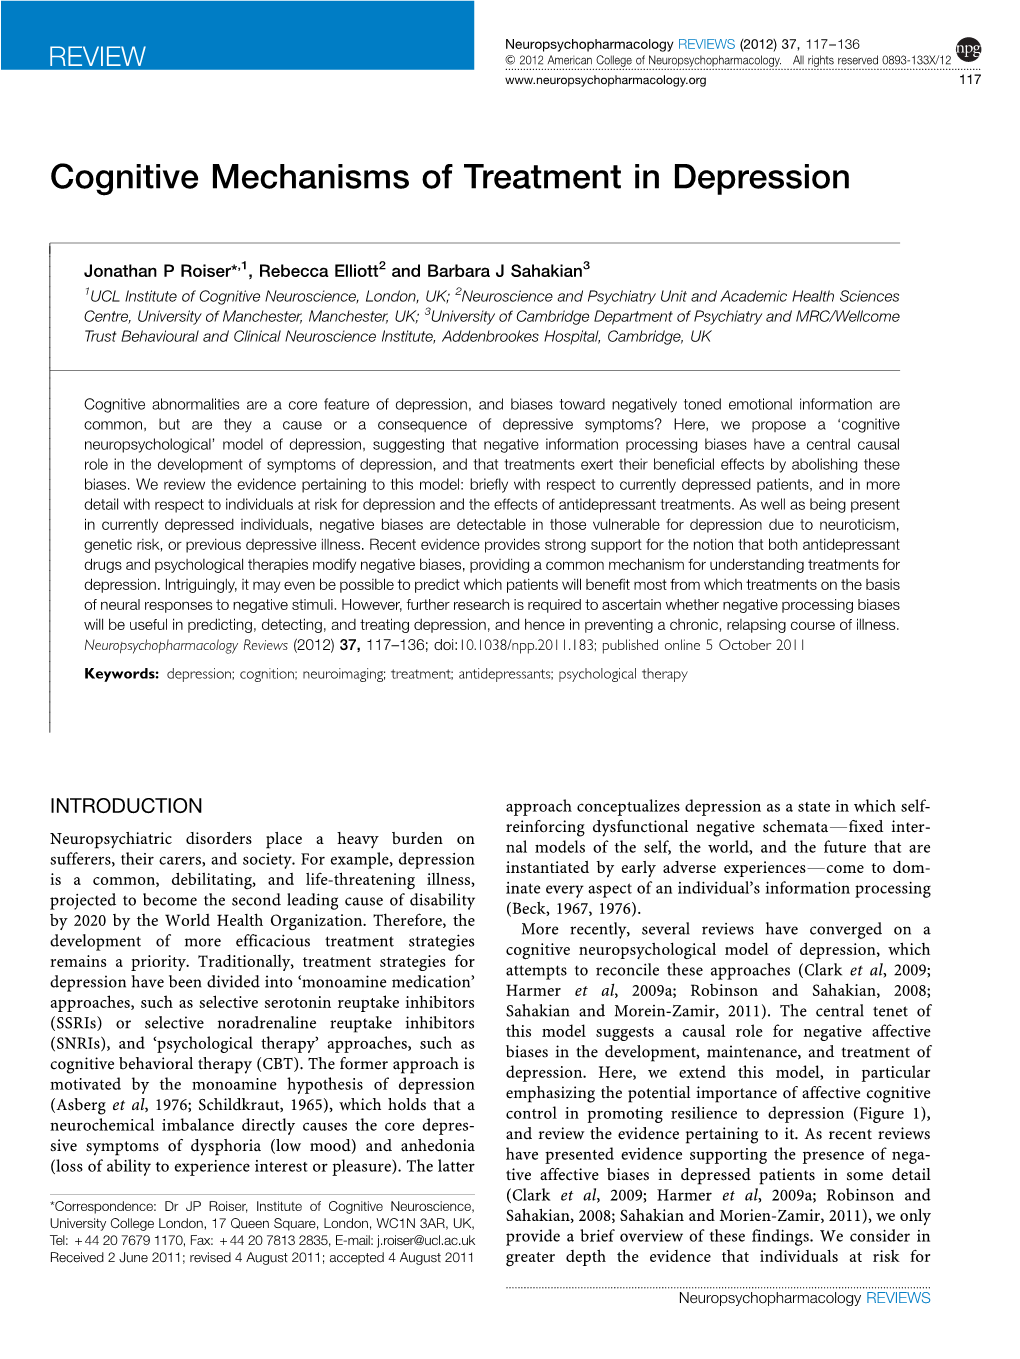 Cognitive Mechanisms of Treatment in Depression